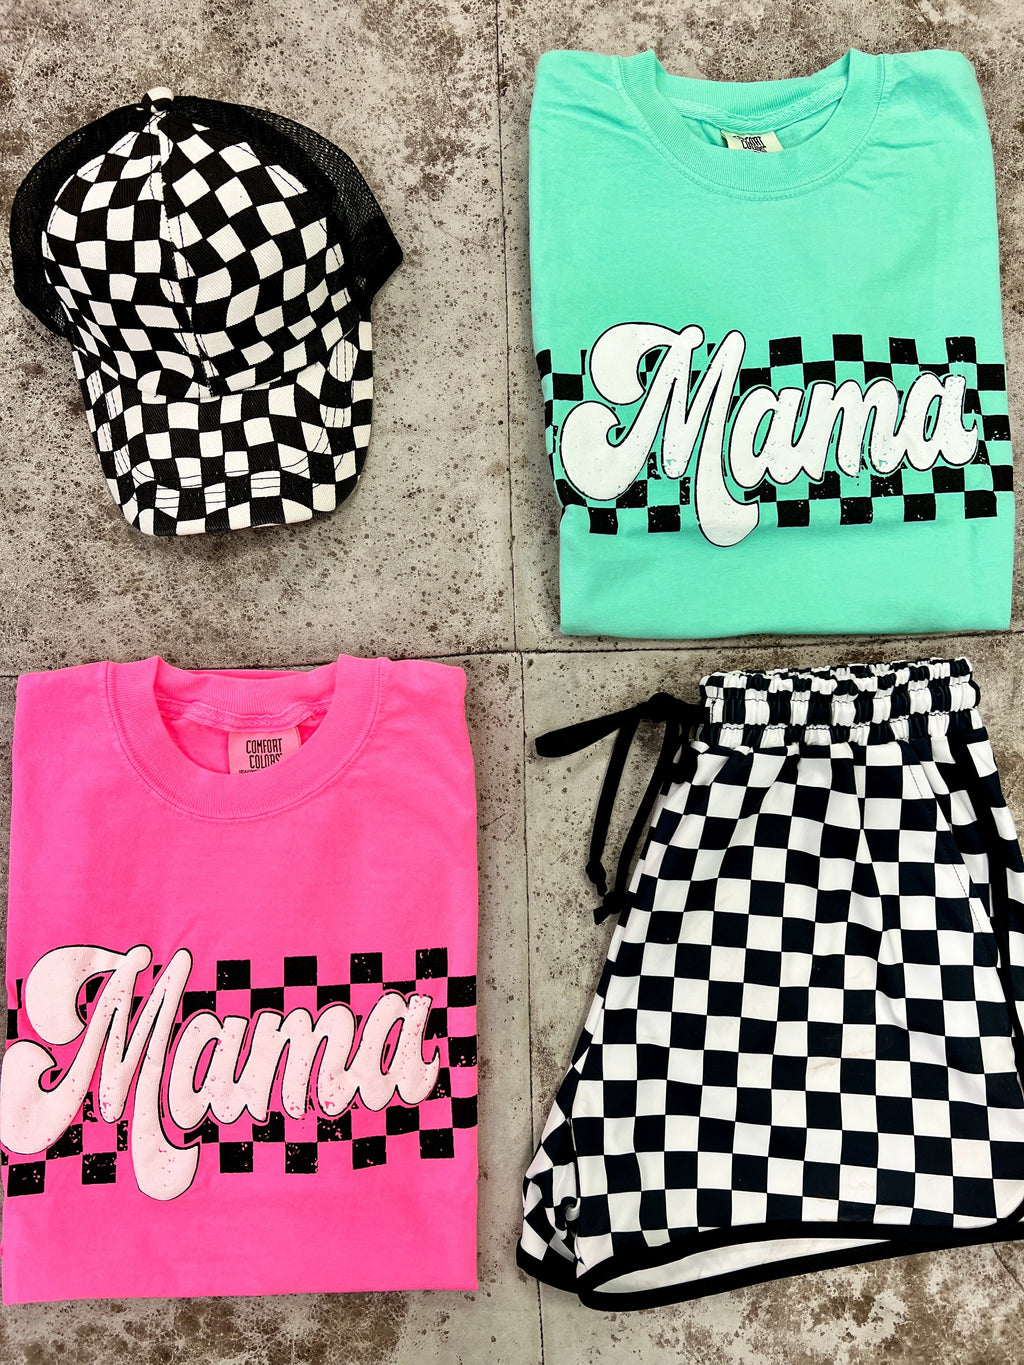 Puff letter tees. Mama tees. Graphic tee. Trending graphic tees for moms. Mother's day gift. Mom shirts. Race flag design. Black checkered. Mama shirts. Mama graphic tees. Short sleeve t-shirt. Crew neck t-shirt. Casual mom outfit. Casual tee. Trending outfits. Pink graphic tee. Mint graphic tee. Boutique. Small biz.